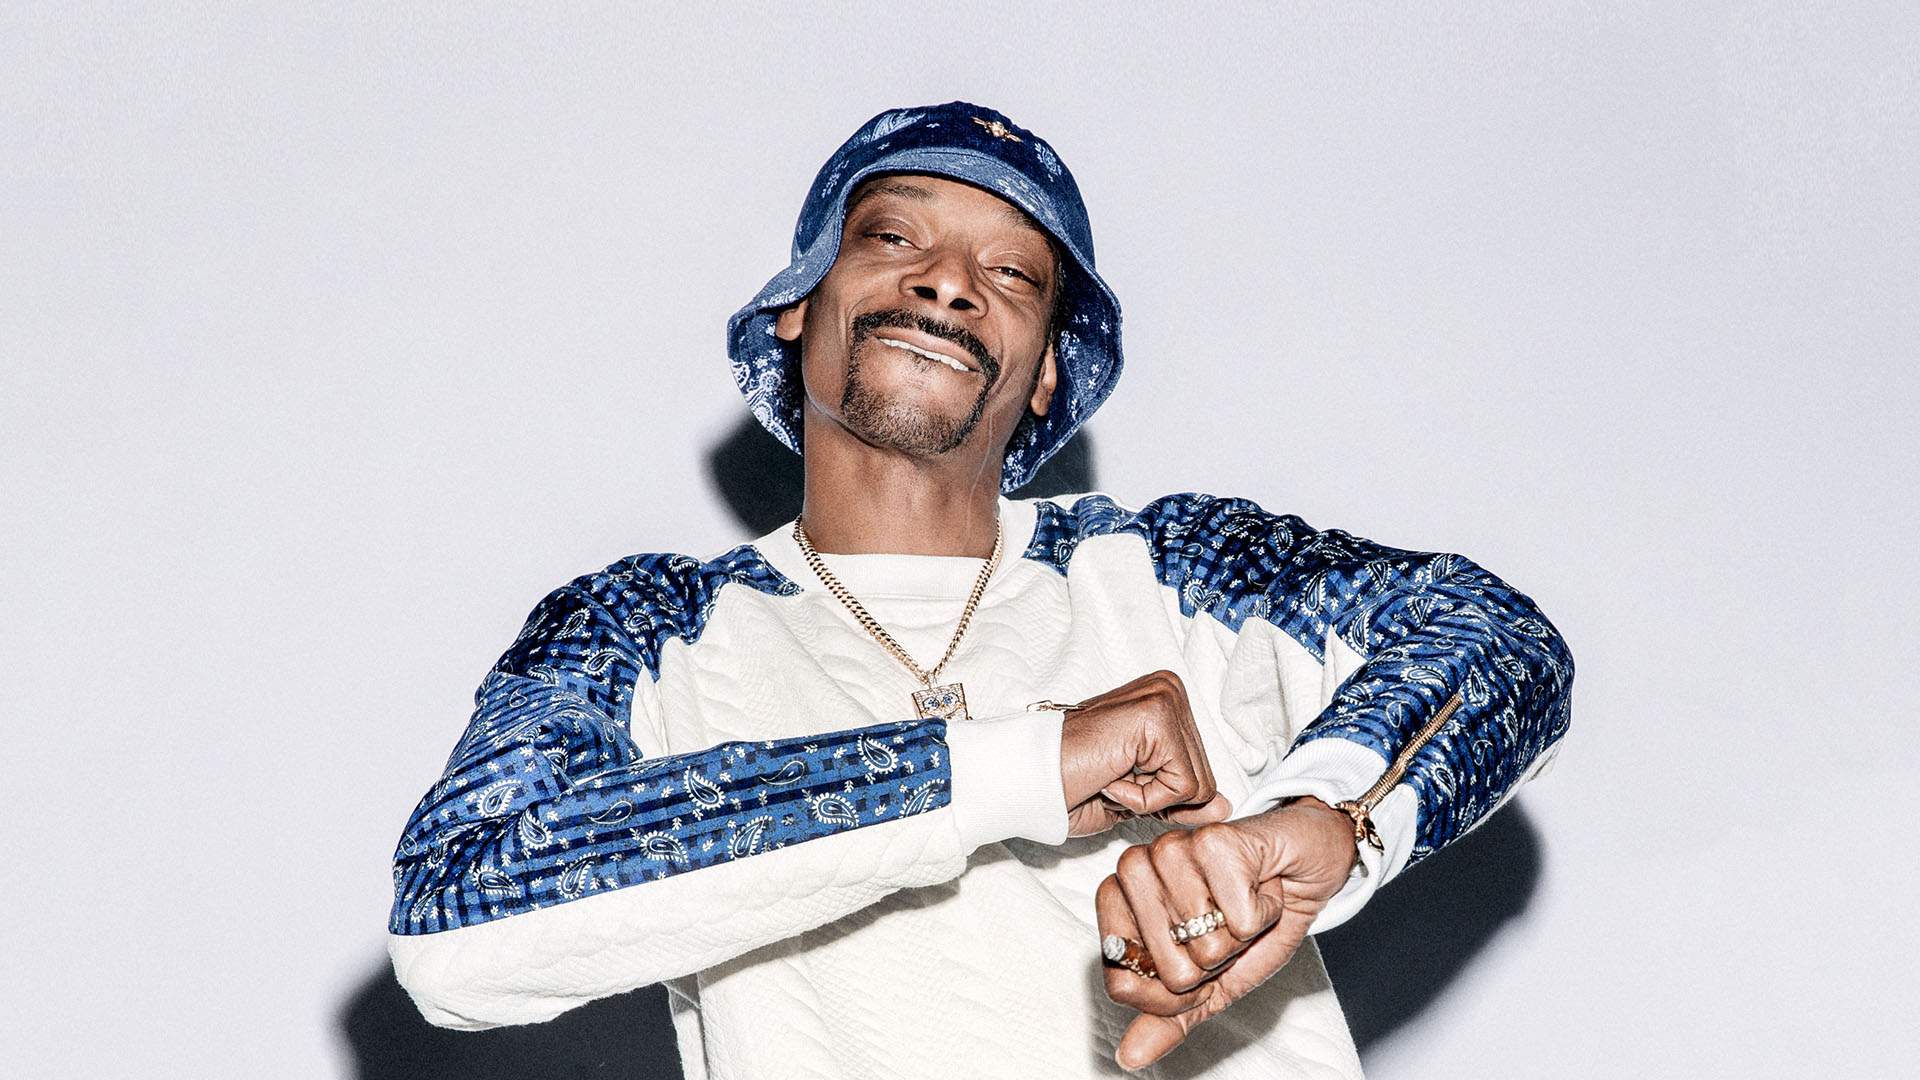 Break Out the Gin and Juice: Snoop Dogg Is Dropping His Rescheduled Arena Tour Into Australia in 2023